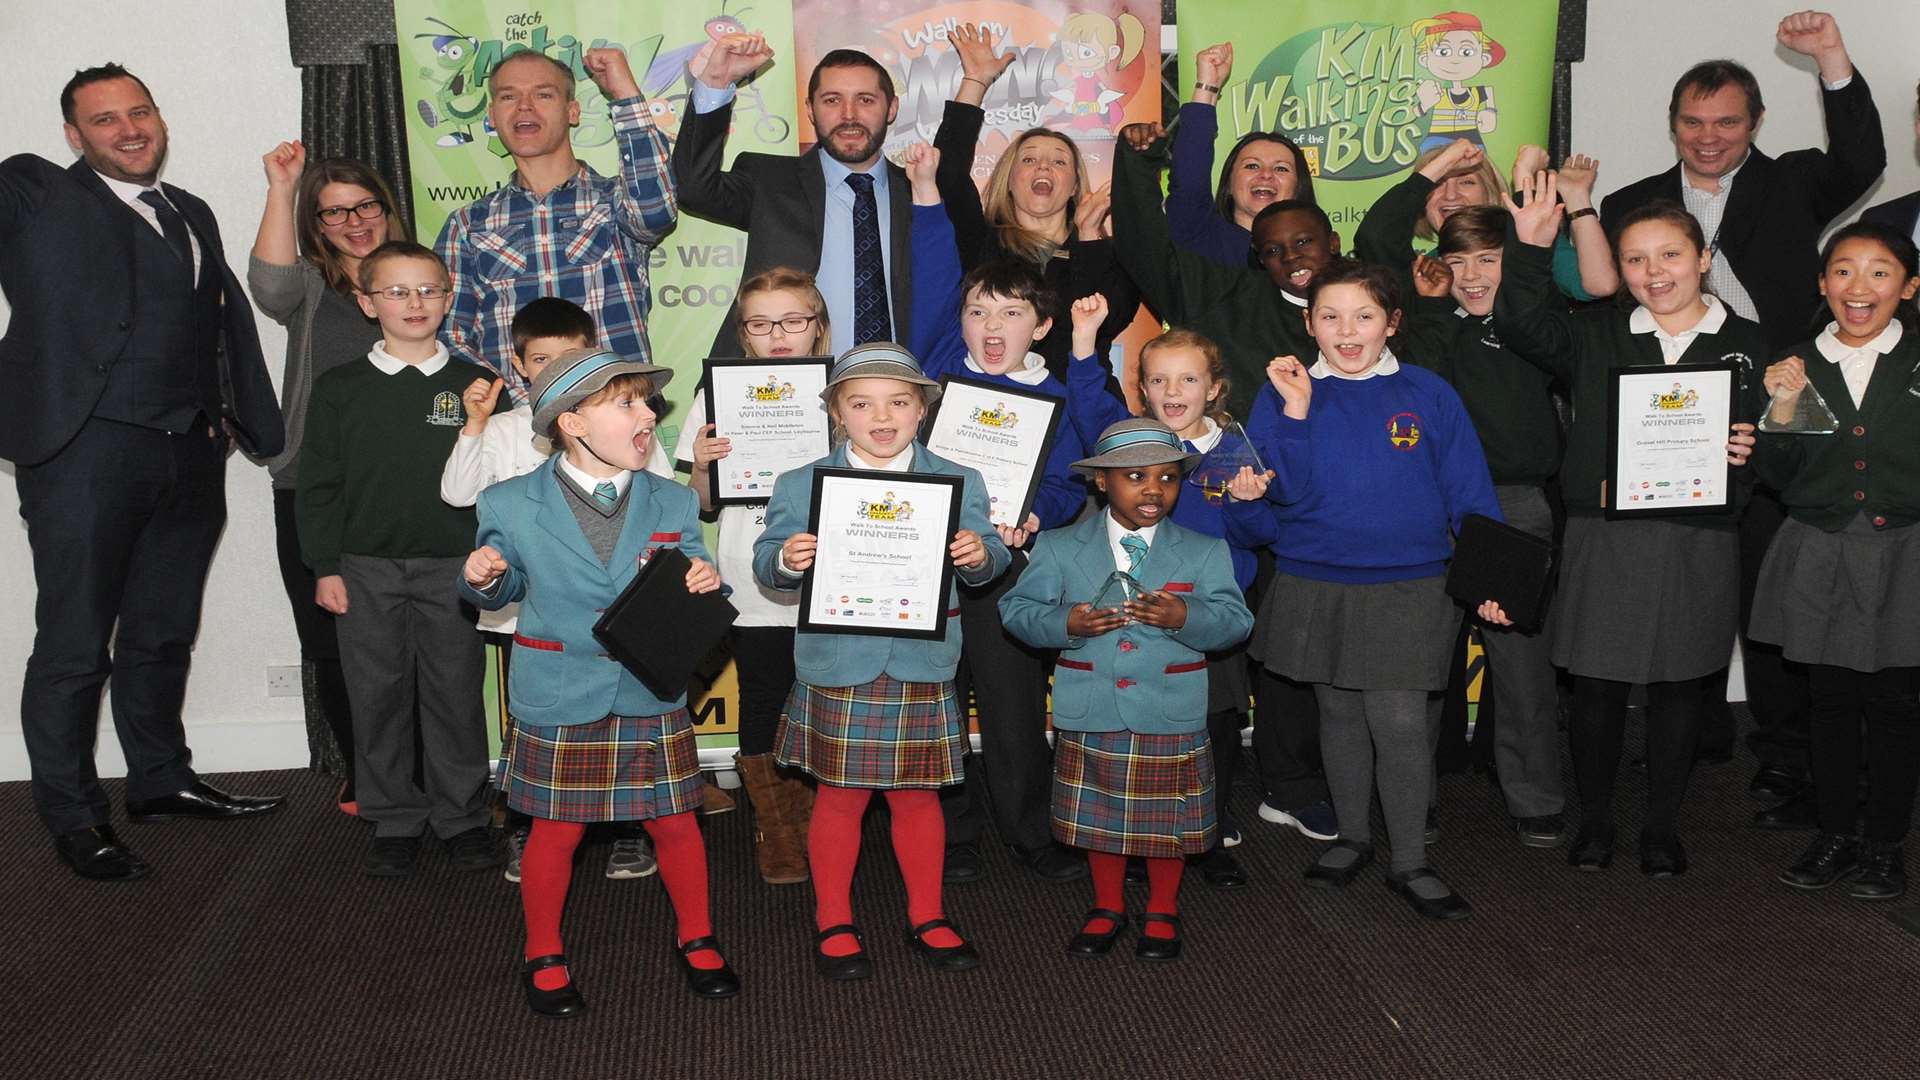 Pupils at Gravel Hill Primary School, Bexley, Bridge and Patrixbourne School, Canterbury, St. Peter and Paul CEP School, Leybourne, and St. Andrew's School, Rochester, celebrate their Overall Winners Awards at the Walk to School Awards 2016 presentation at Rowhill Grange